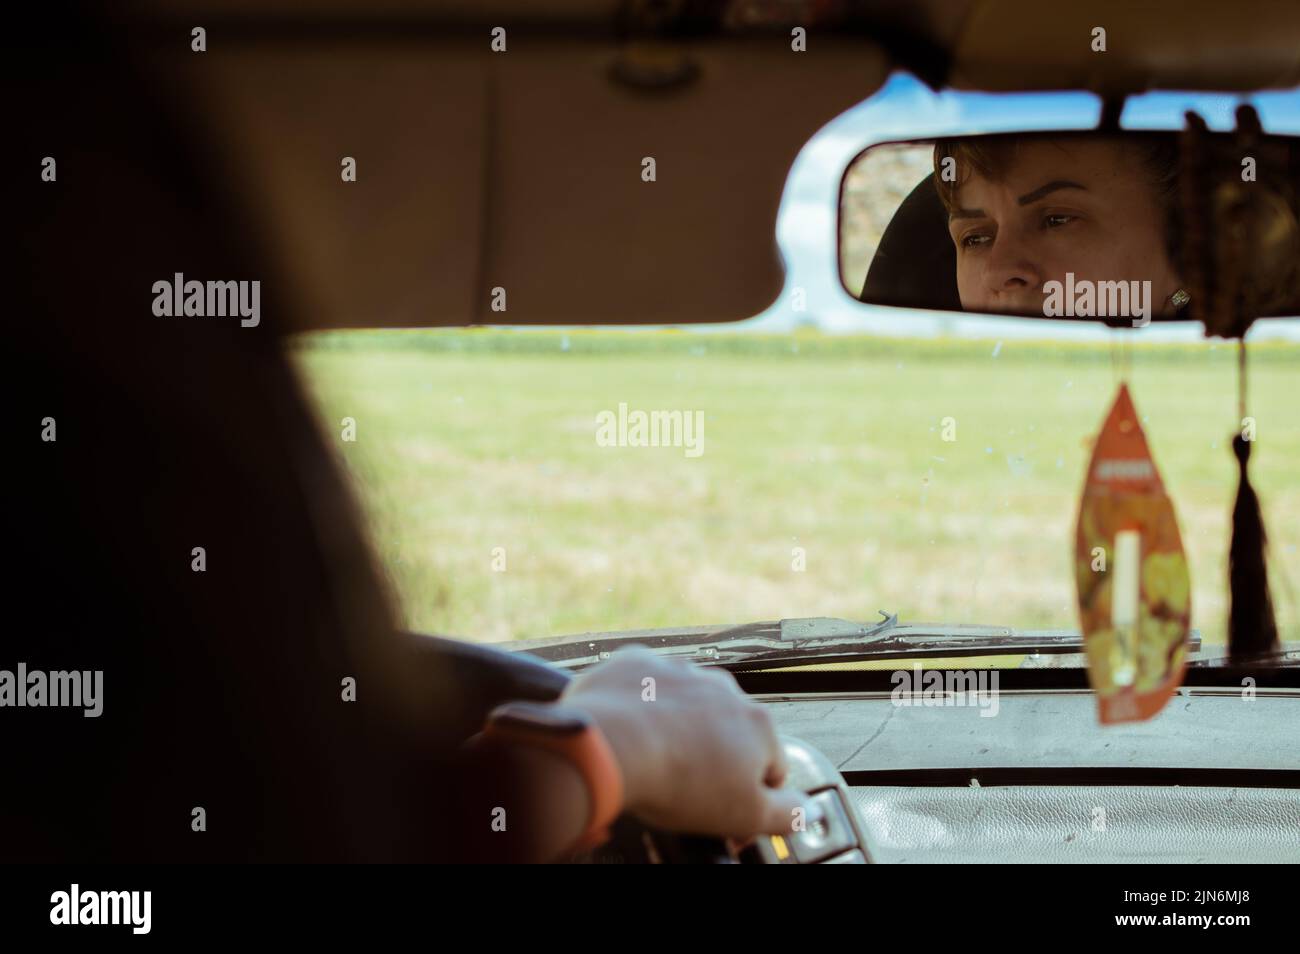 Woman looks thoughtfully in car mirror Stock Photo